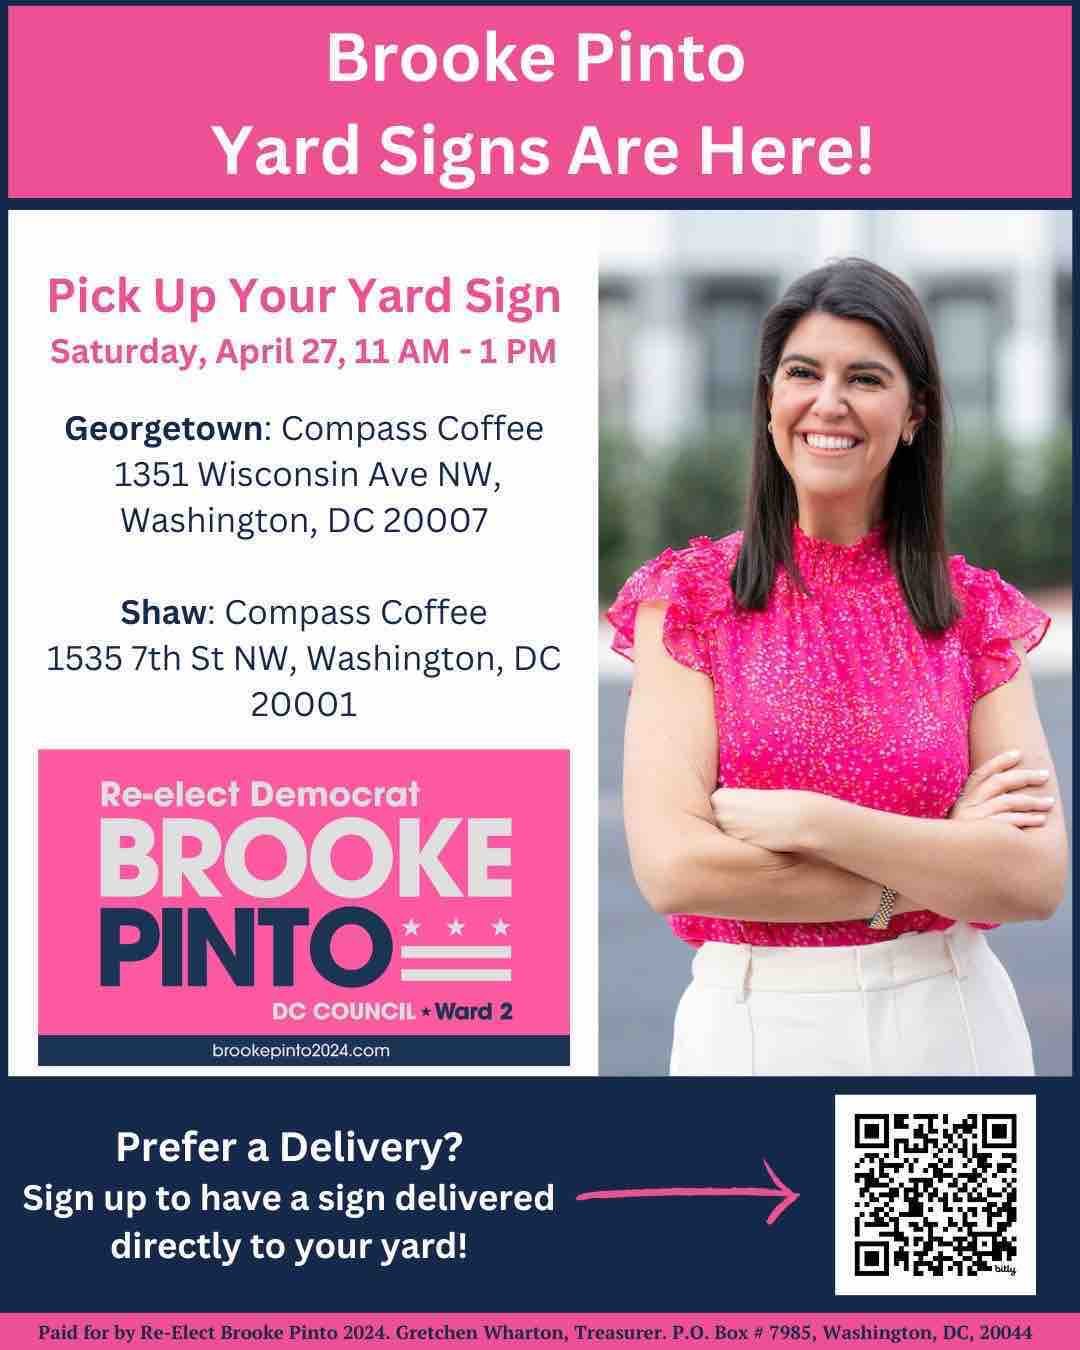 Meet Brooke Pinto and her team this Saturday, April 27, from 11:00 AM &mdash; 1:00 PM at Compass Coffee in Shaw or Georgetown to pick up your yard sign!

If you would like a sign delivered, visit this link:
bit.ly/bpyardsign #Ward2